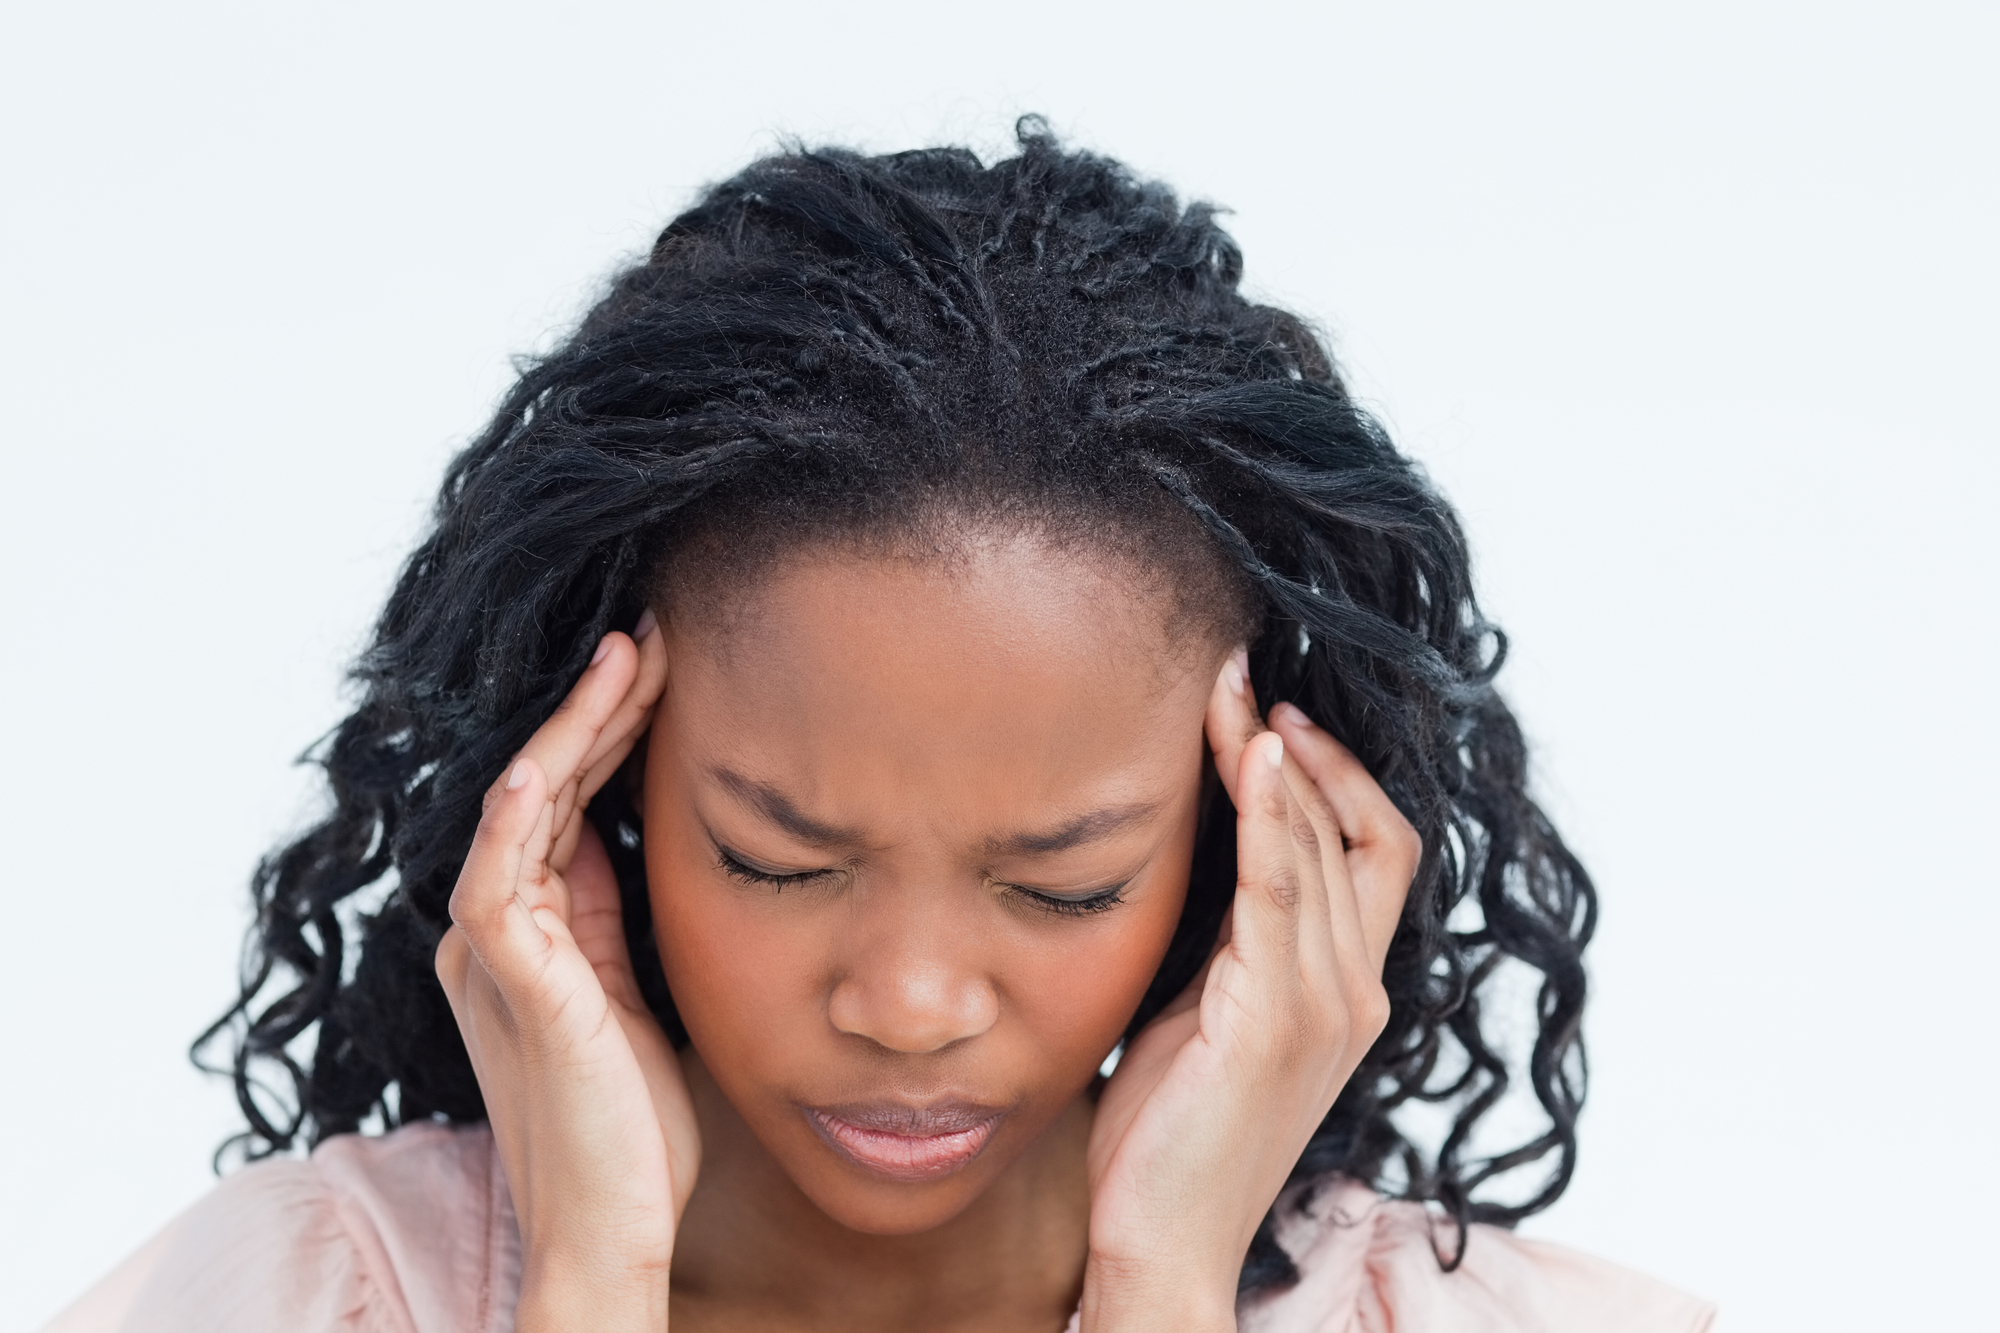 Are Headaches and Migraines Affecting Your Life? You Got This!